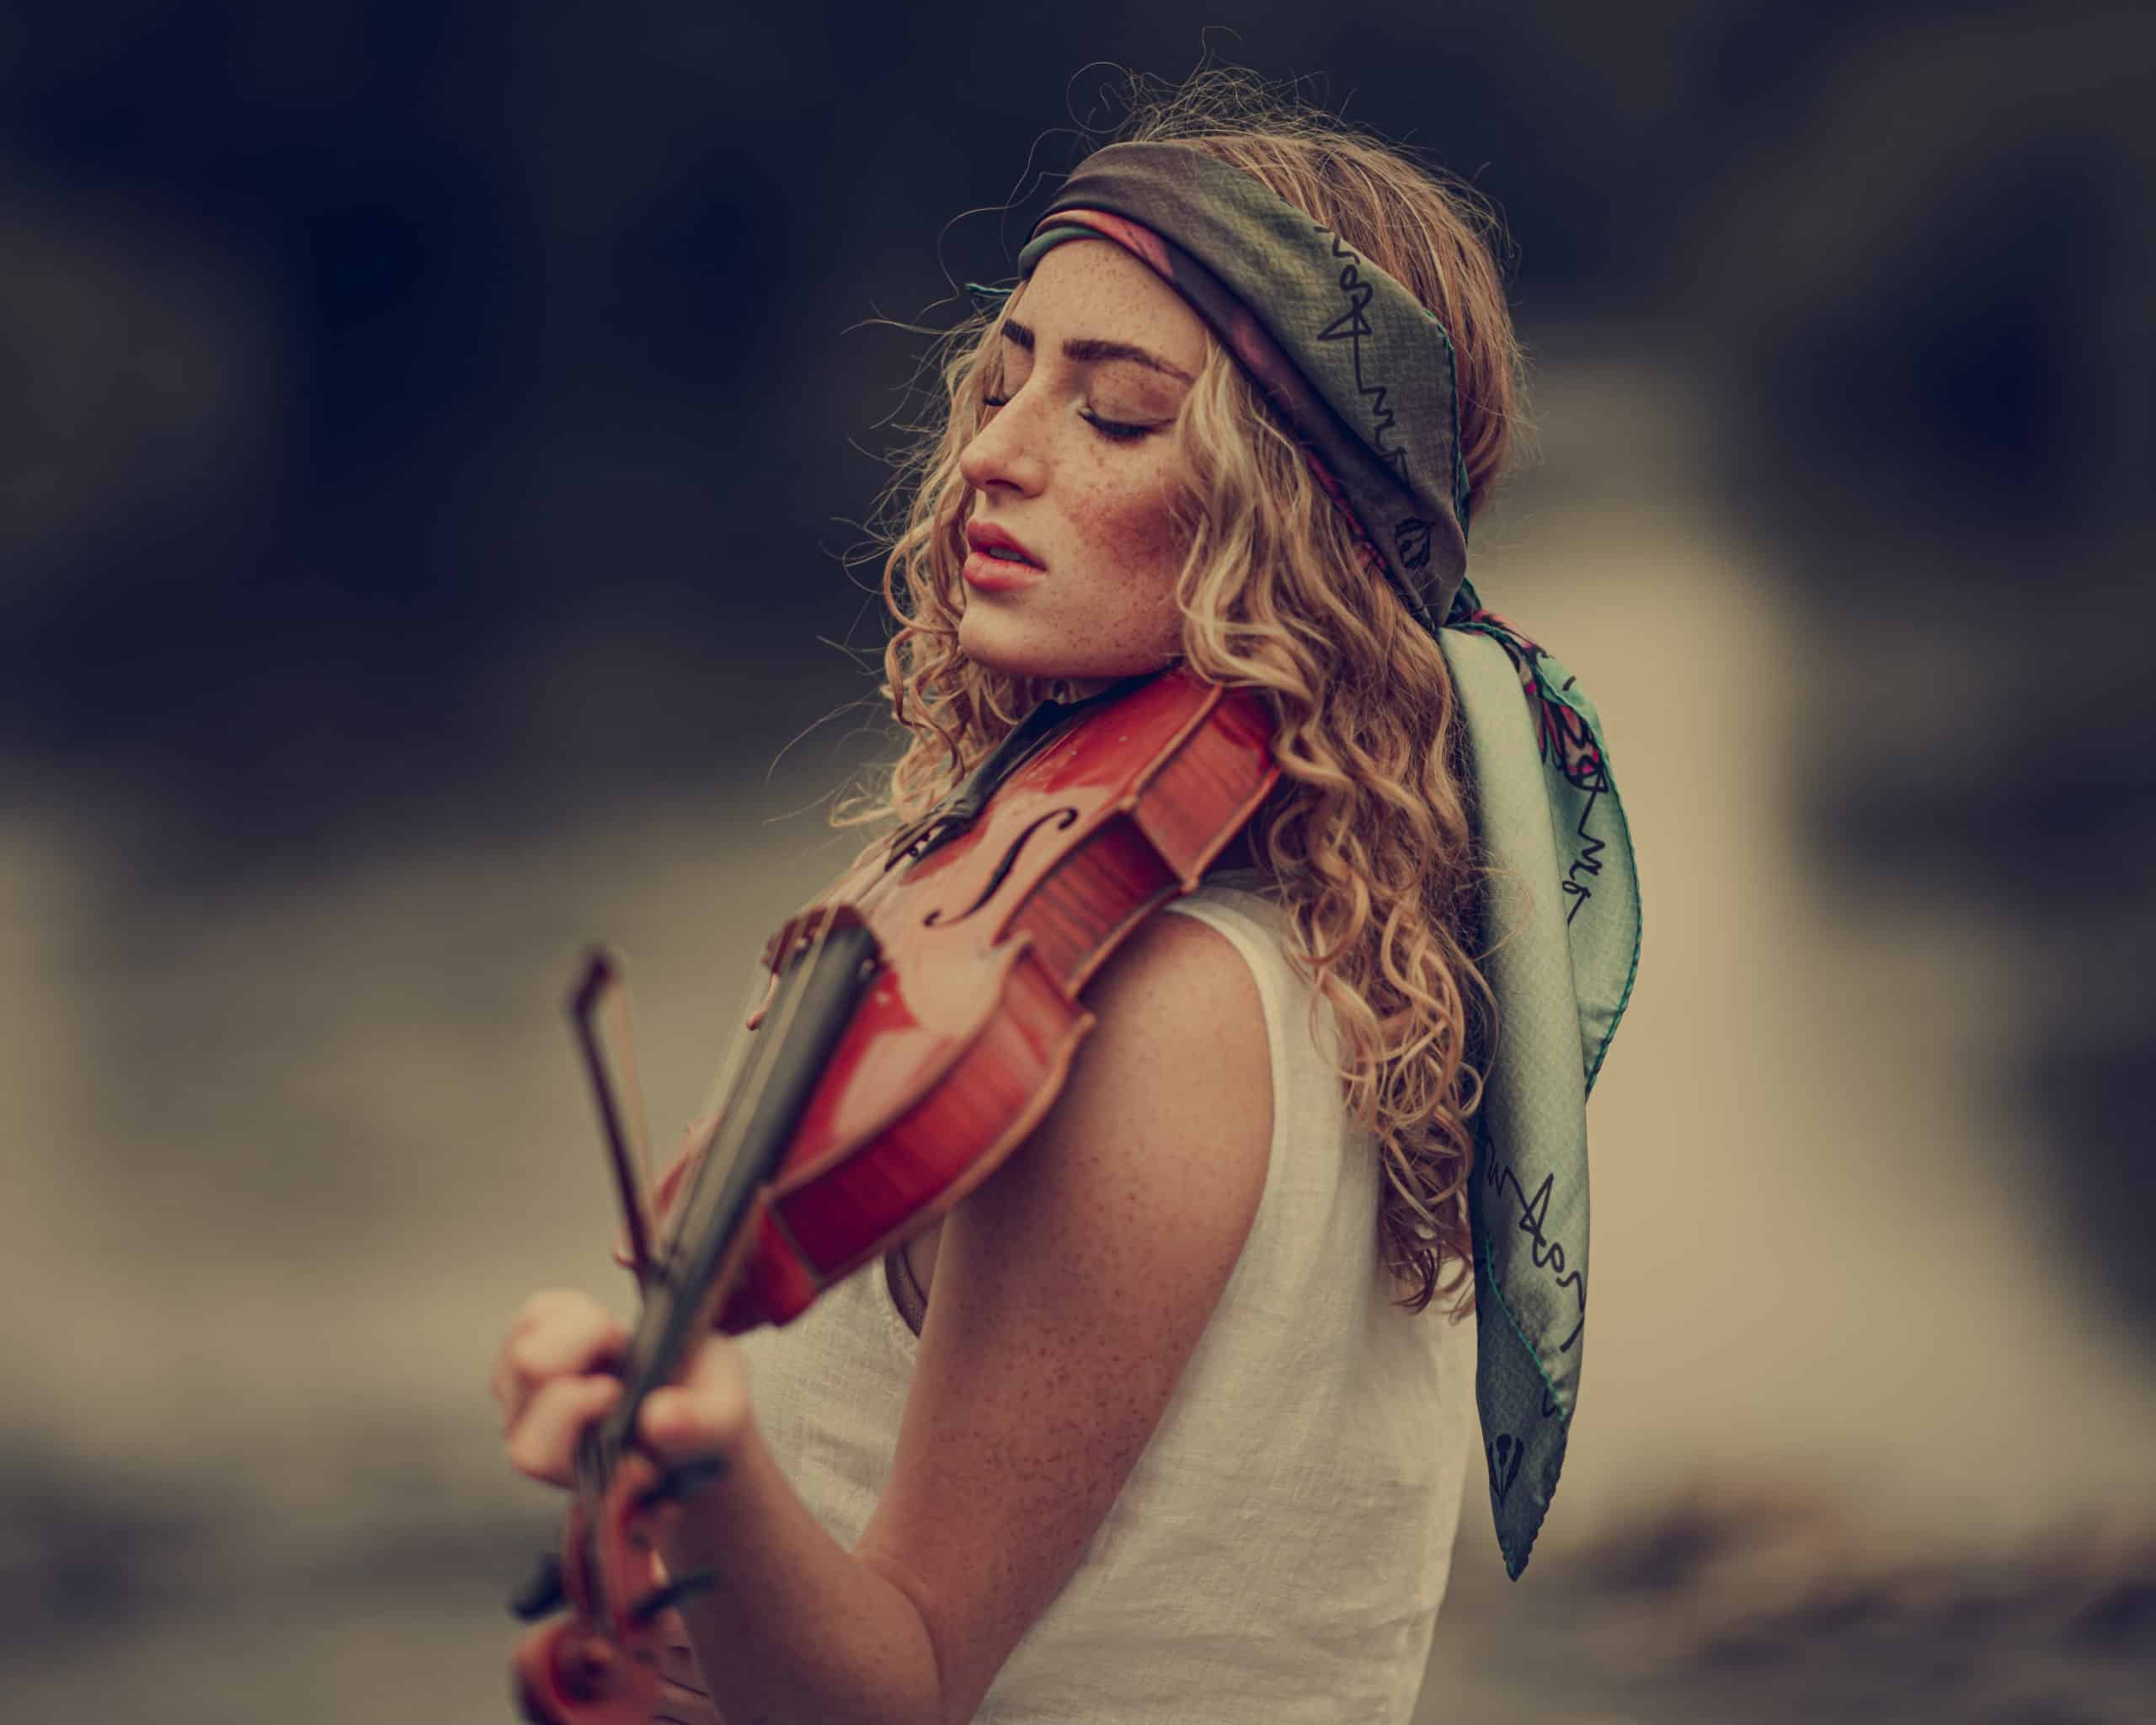 Boho woman playing the violin outdoor.